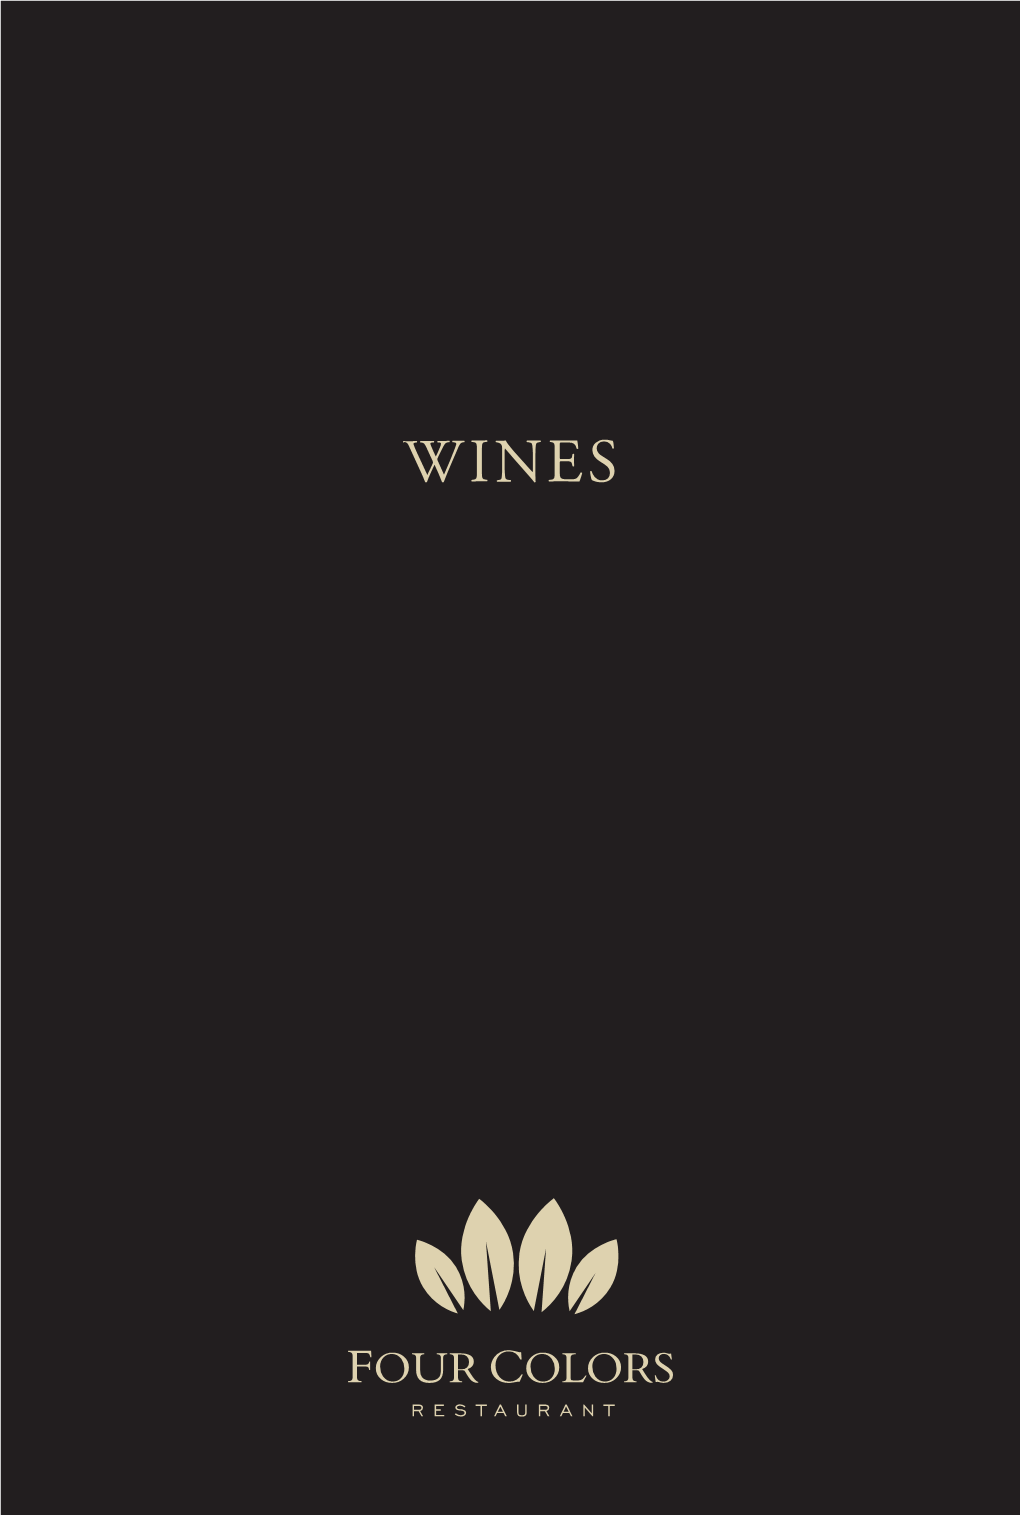 White Wine: Light – Bodied and Fresh